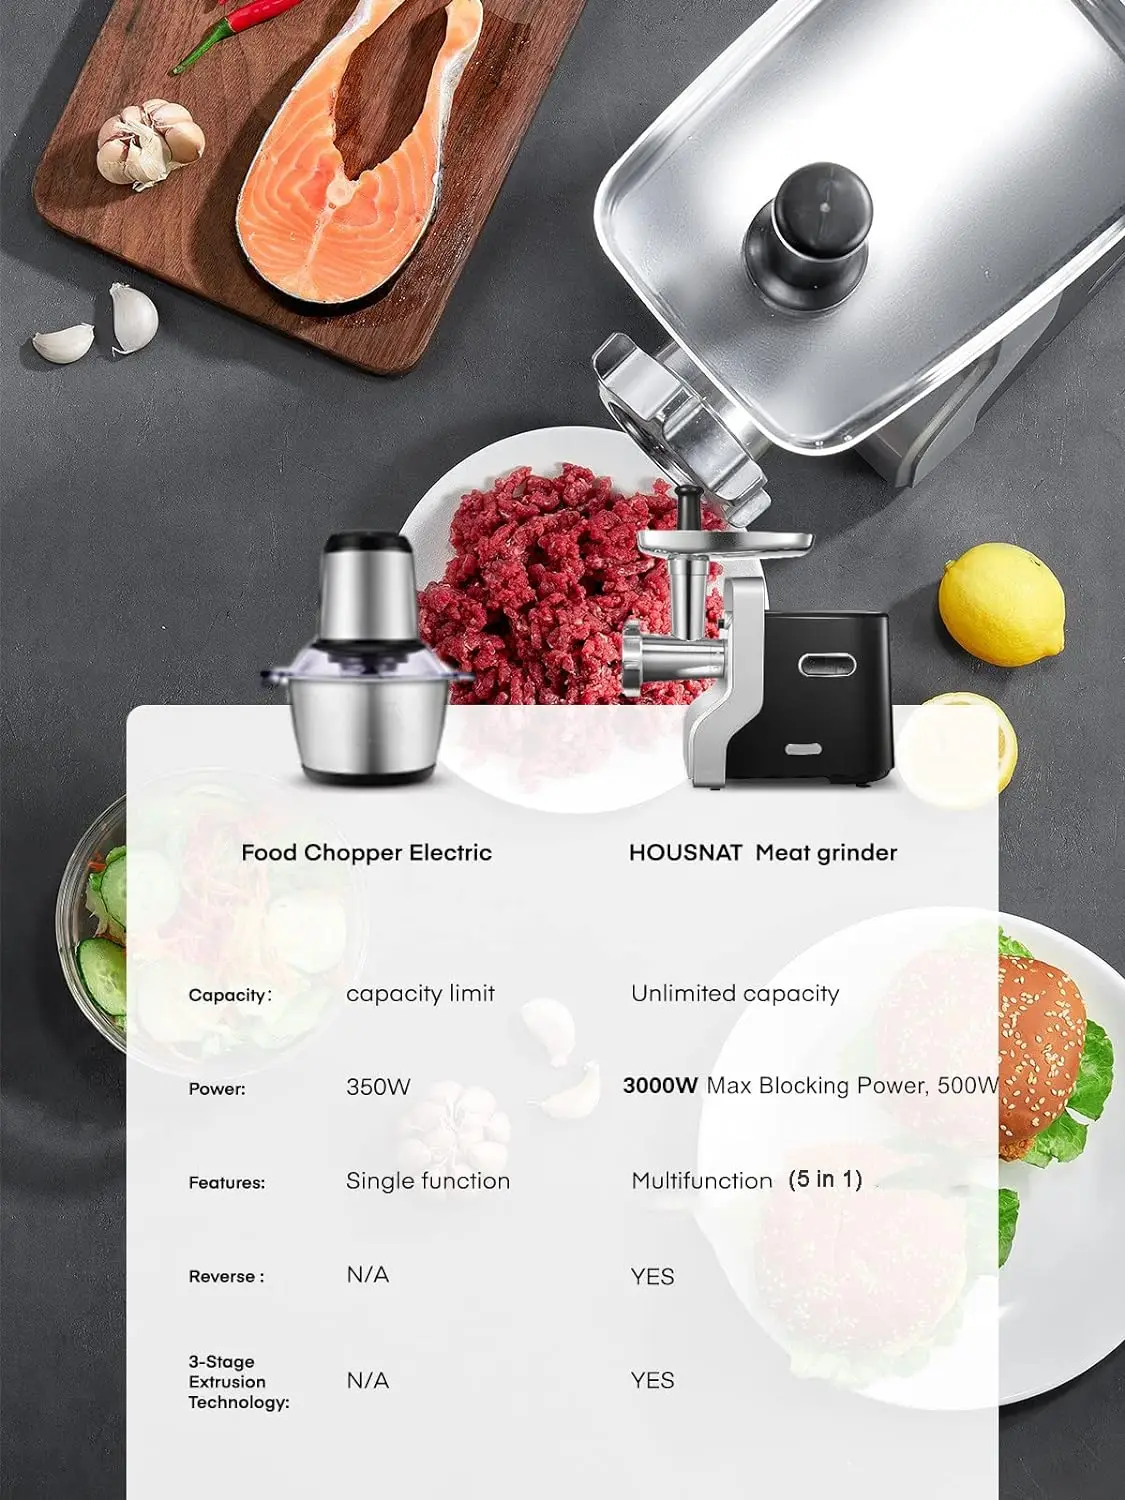 Meat Grinder Heavy Duty - 5 in1 Meat Grinder for Home Use - 3000W Max  Powerful - Sausage Stuffer - Slicer/Shredder/Grater - Kubbe & Tomato  Juicing